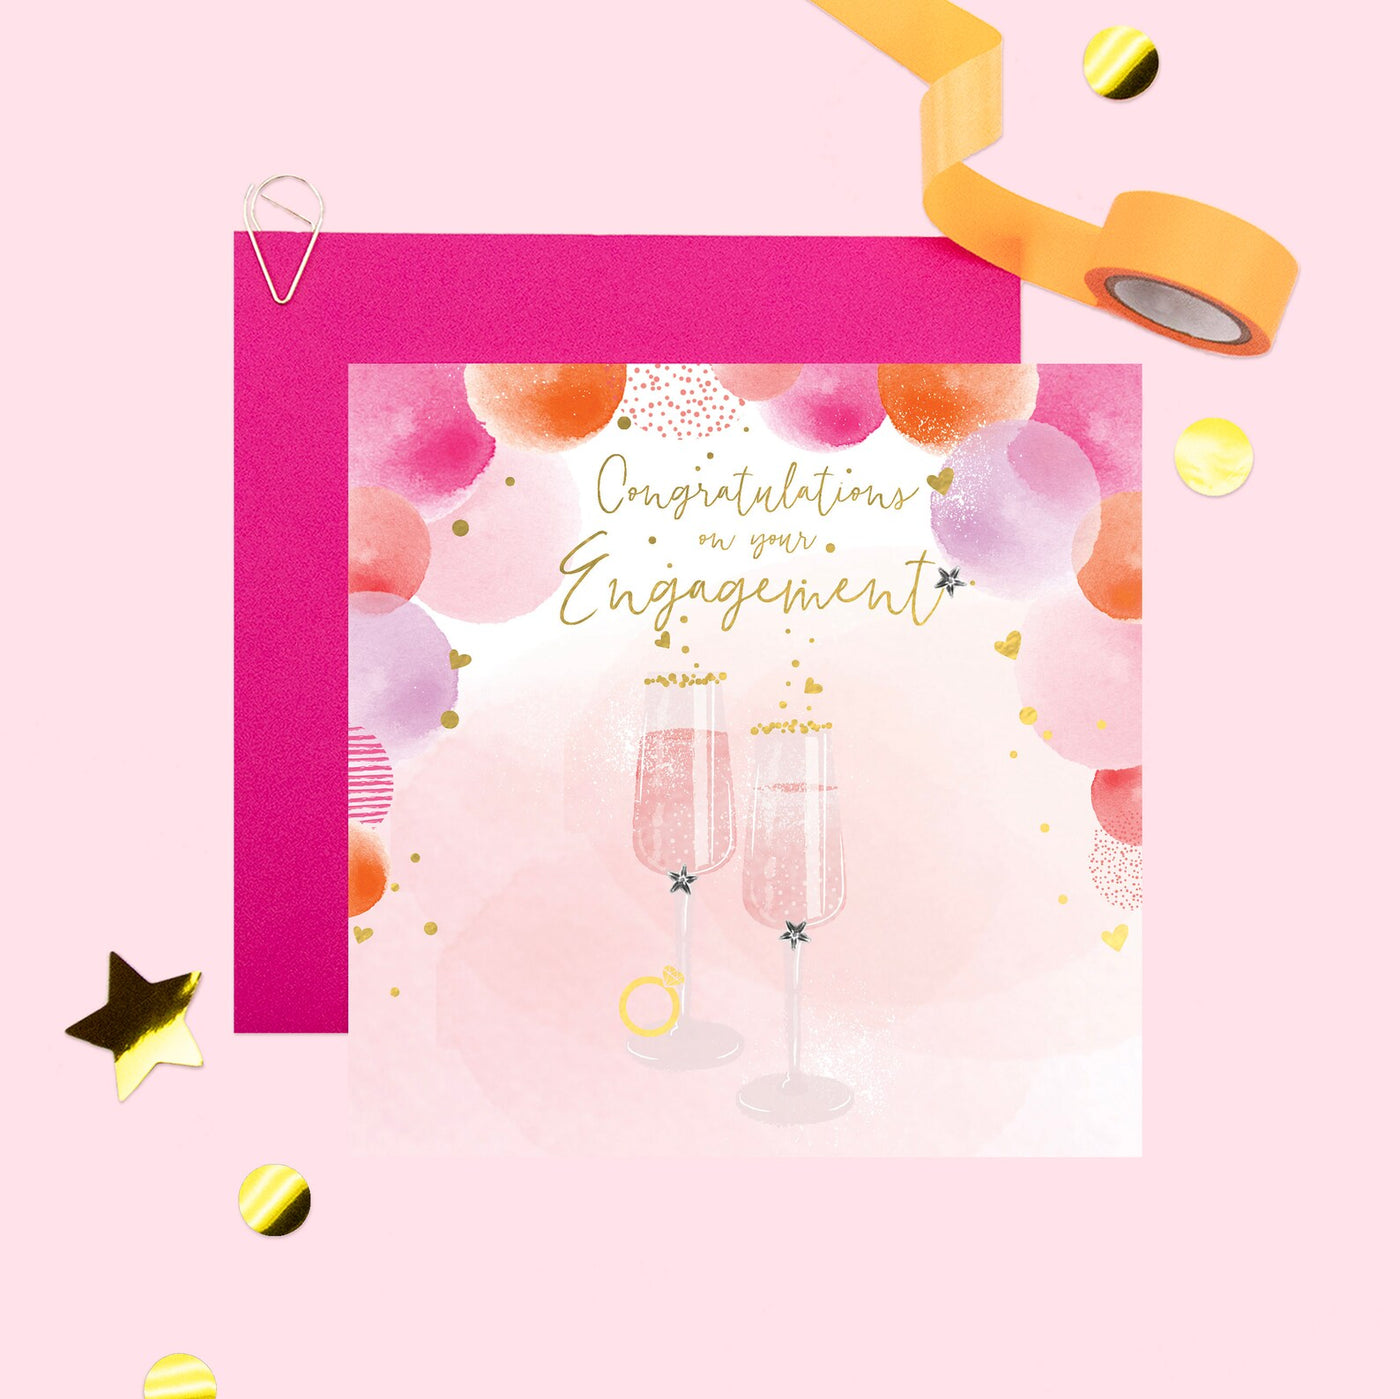 Congratulations on your Engagement Balloons & Champagne Card